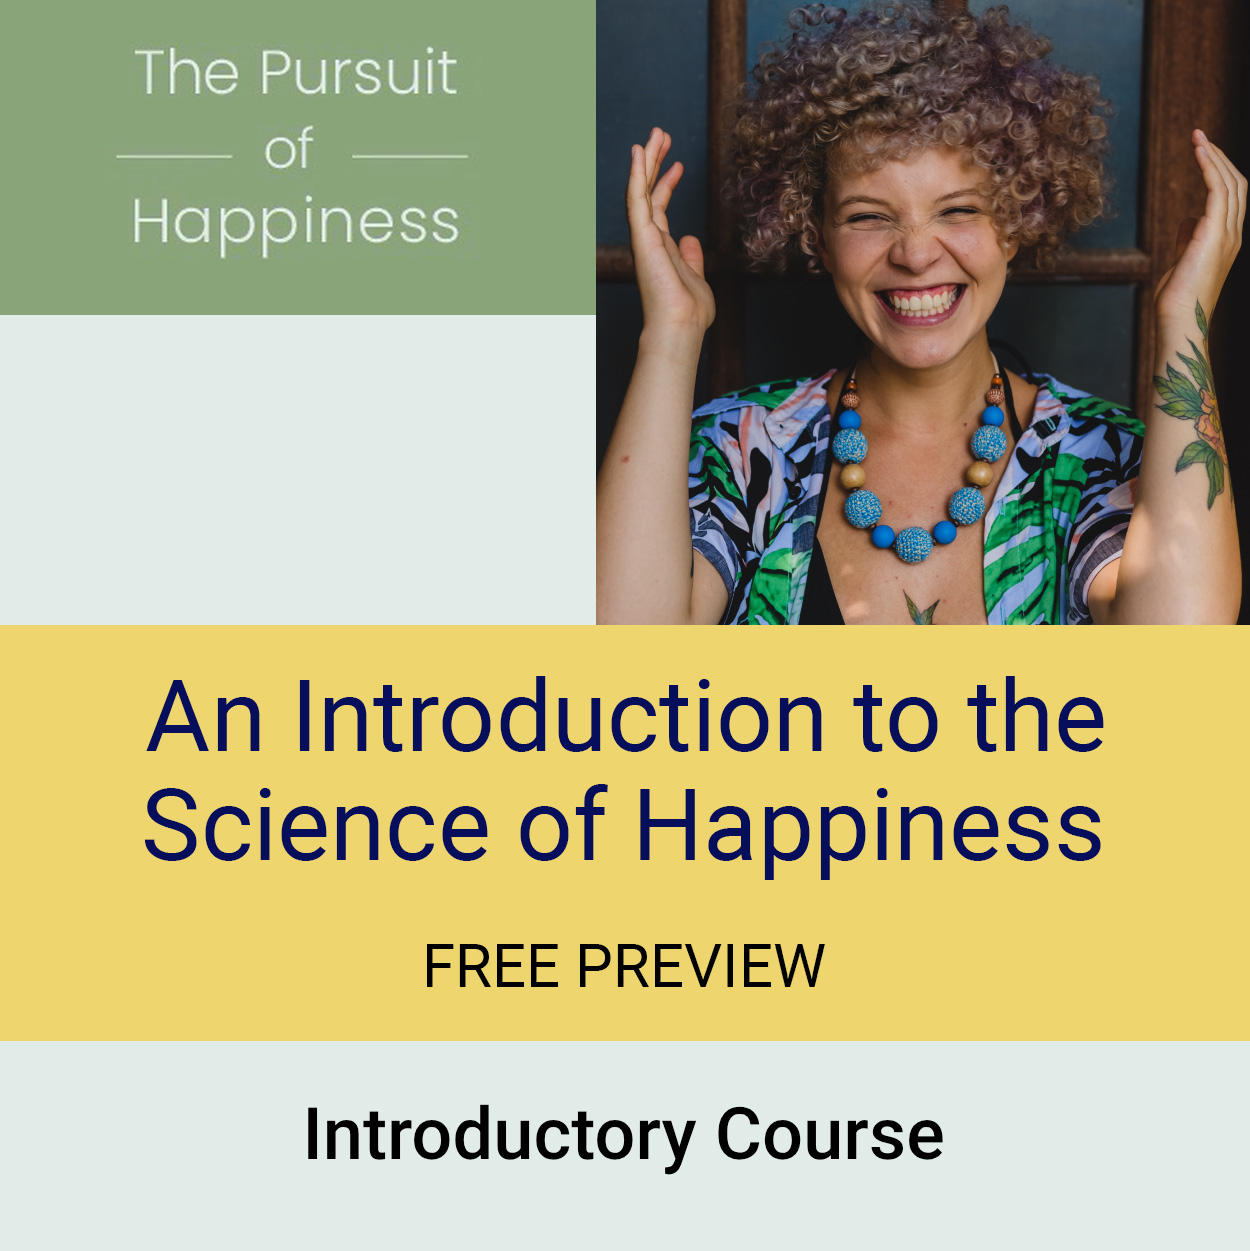 science of happiness intro course